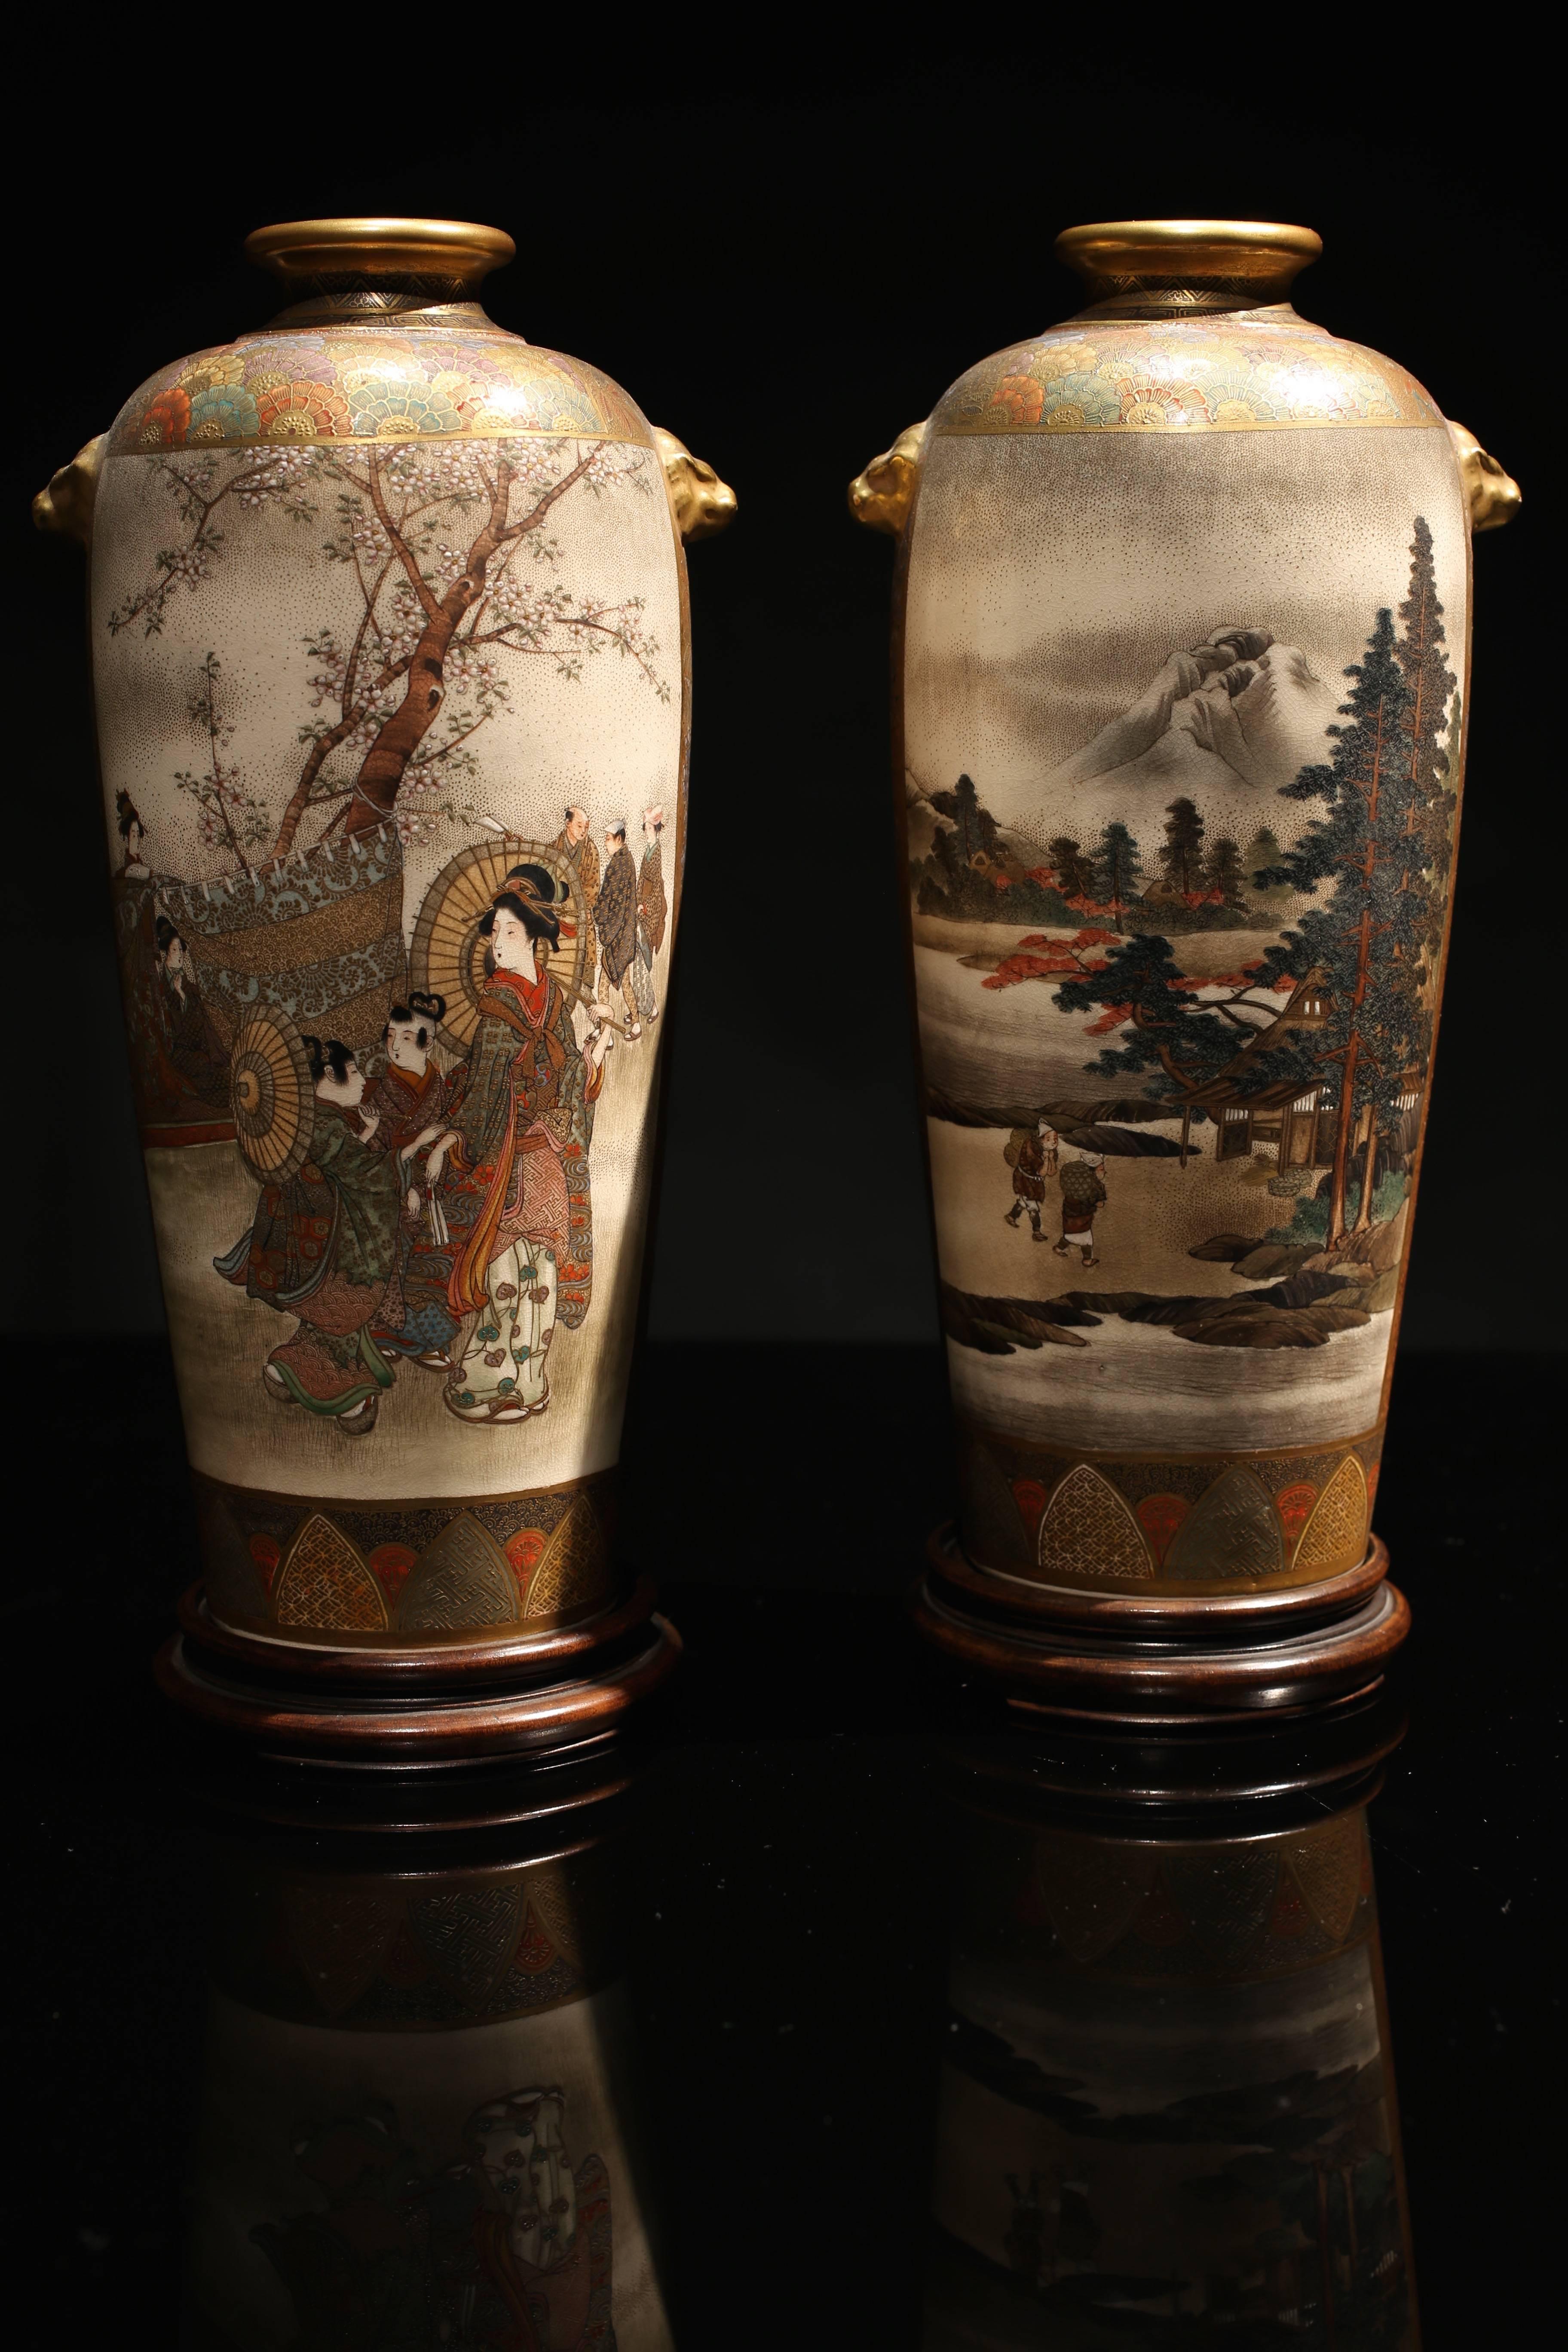 A superb quality pair of Japanese Meiji period Satsuma vases by Hozan.

In excellent condition and very finely painted with figures in a landscape scene and fine gilded highlights.

Together with their original turned stained beech bases and an